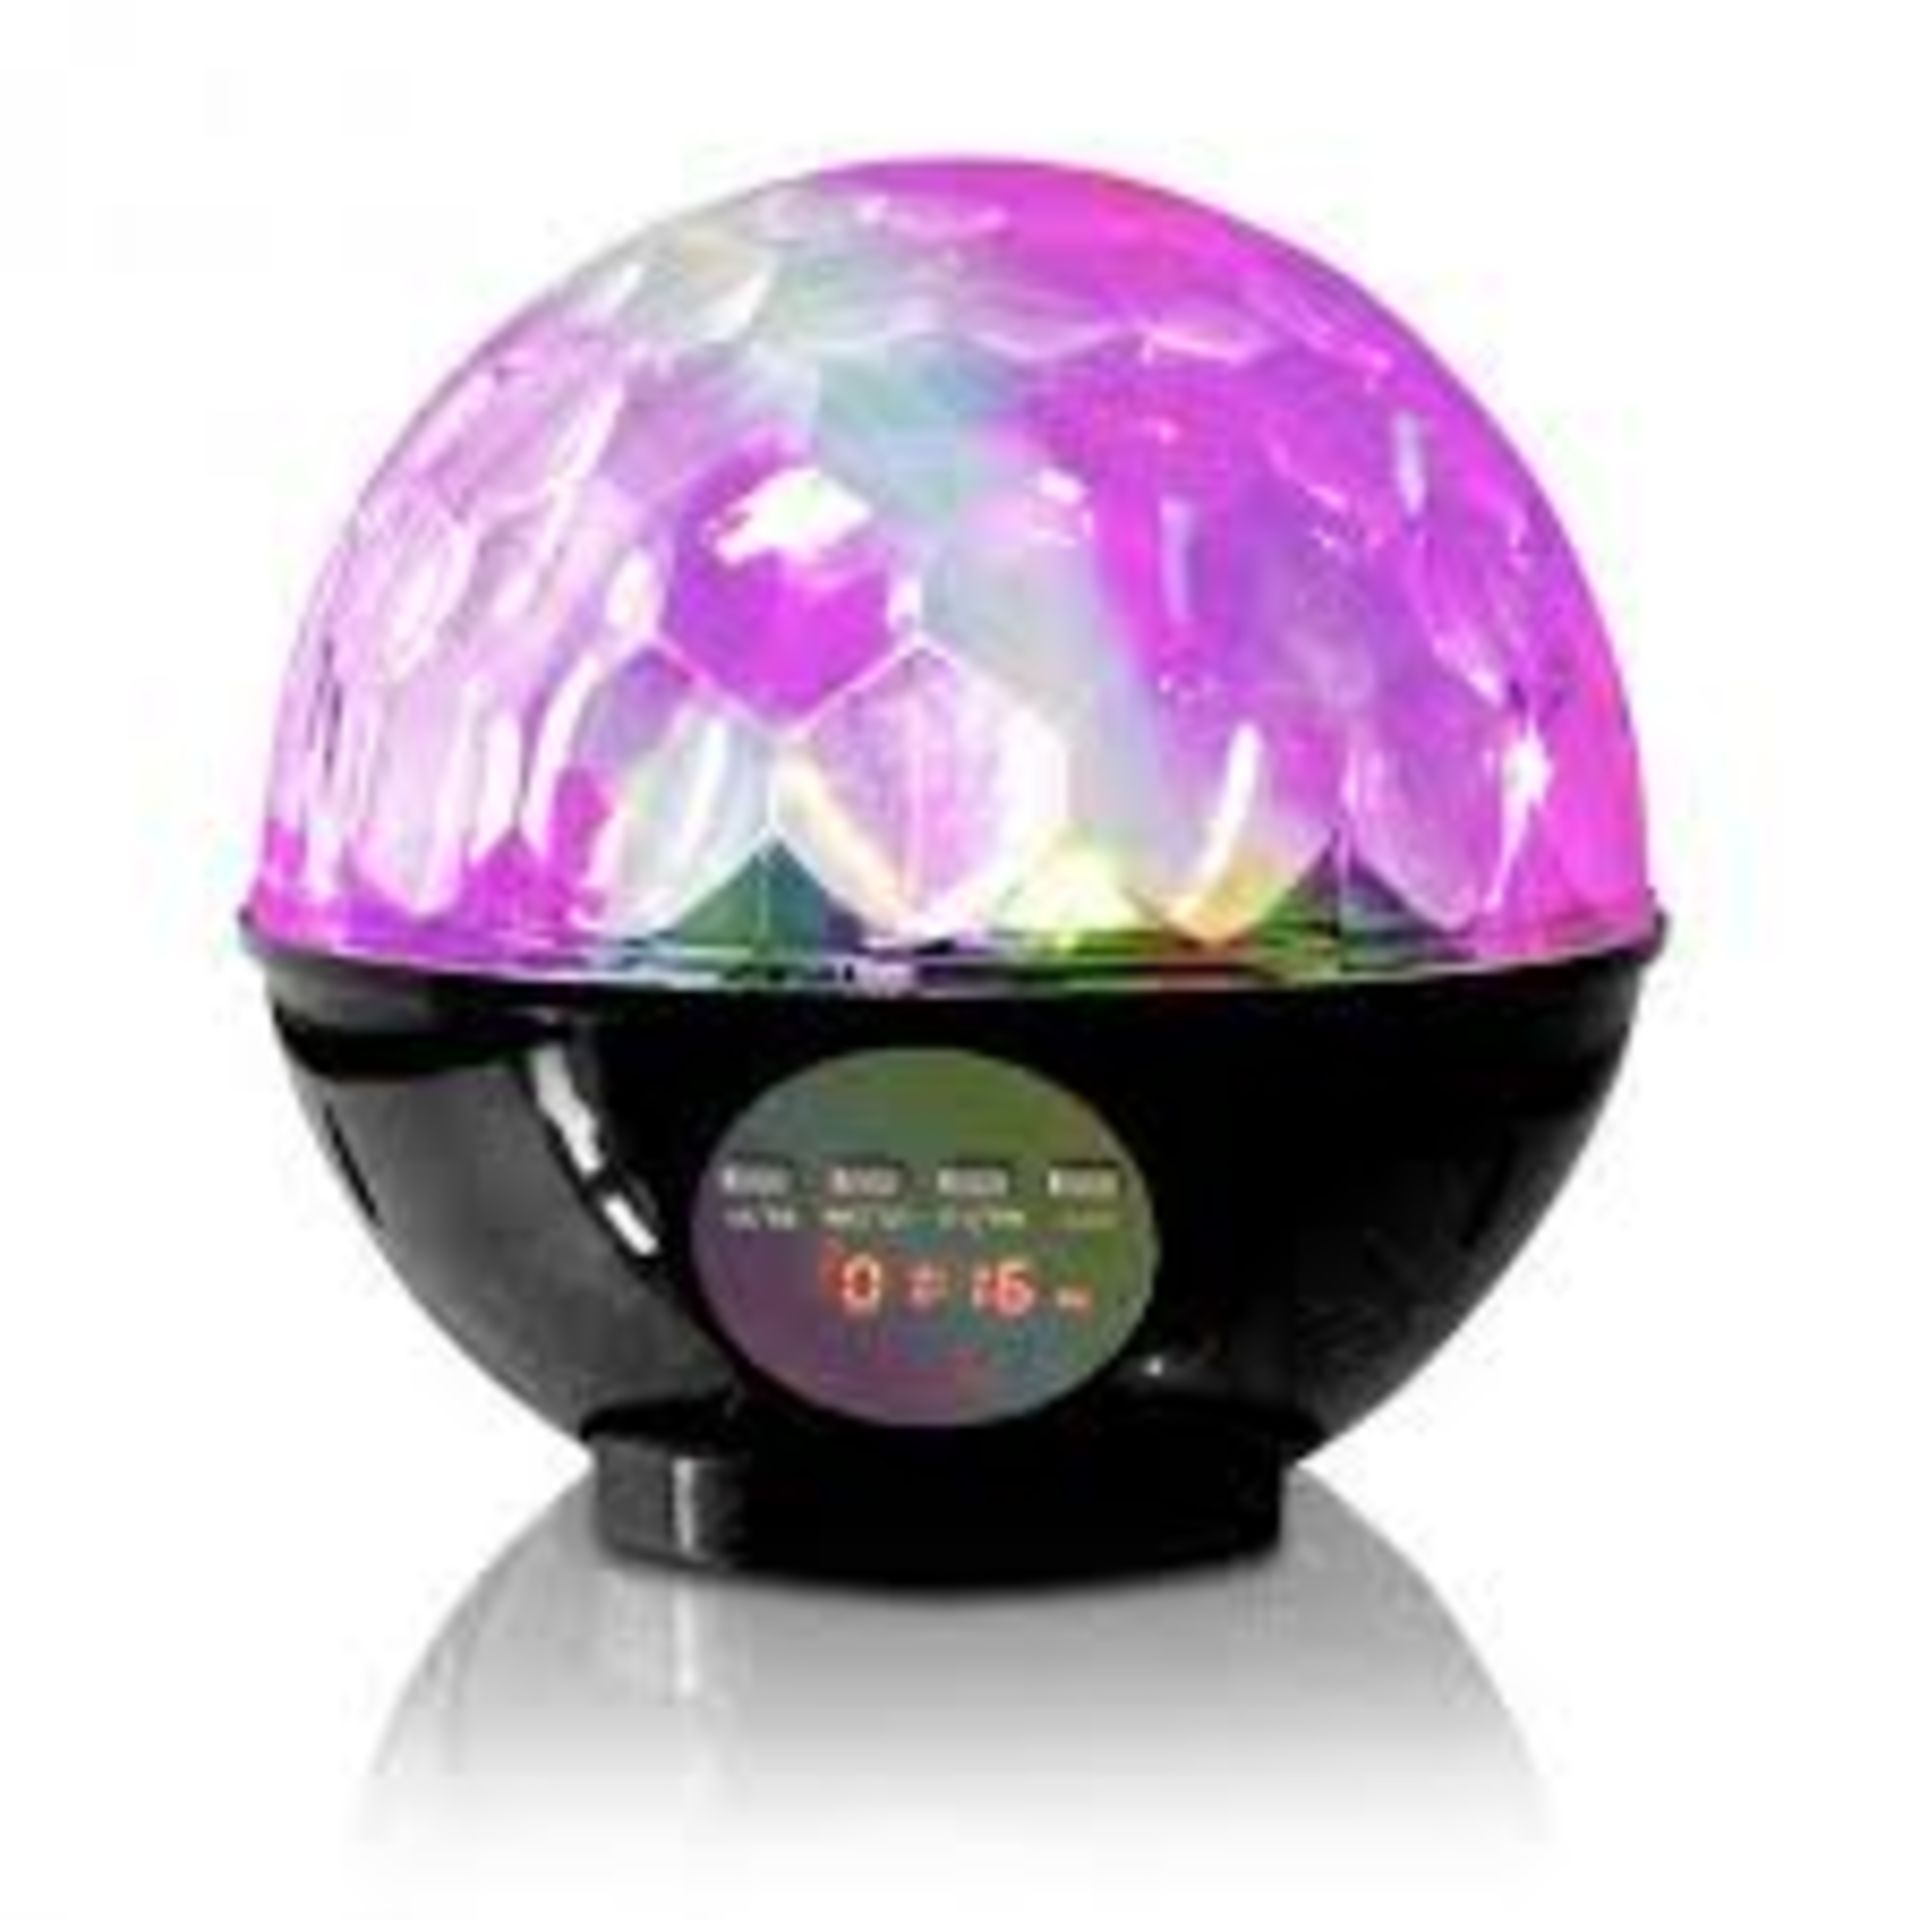 V Brand New Bluetooth Disco Light Speaker and Radio X 2 Bid price to be multiplied by Two